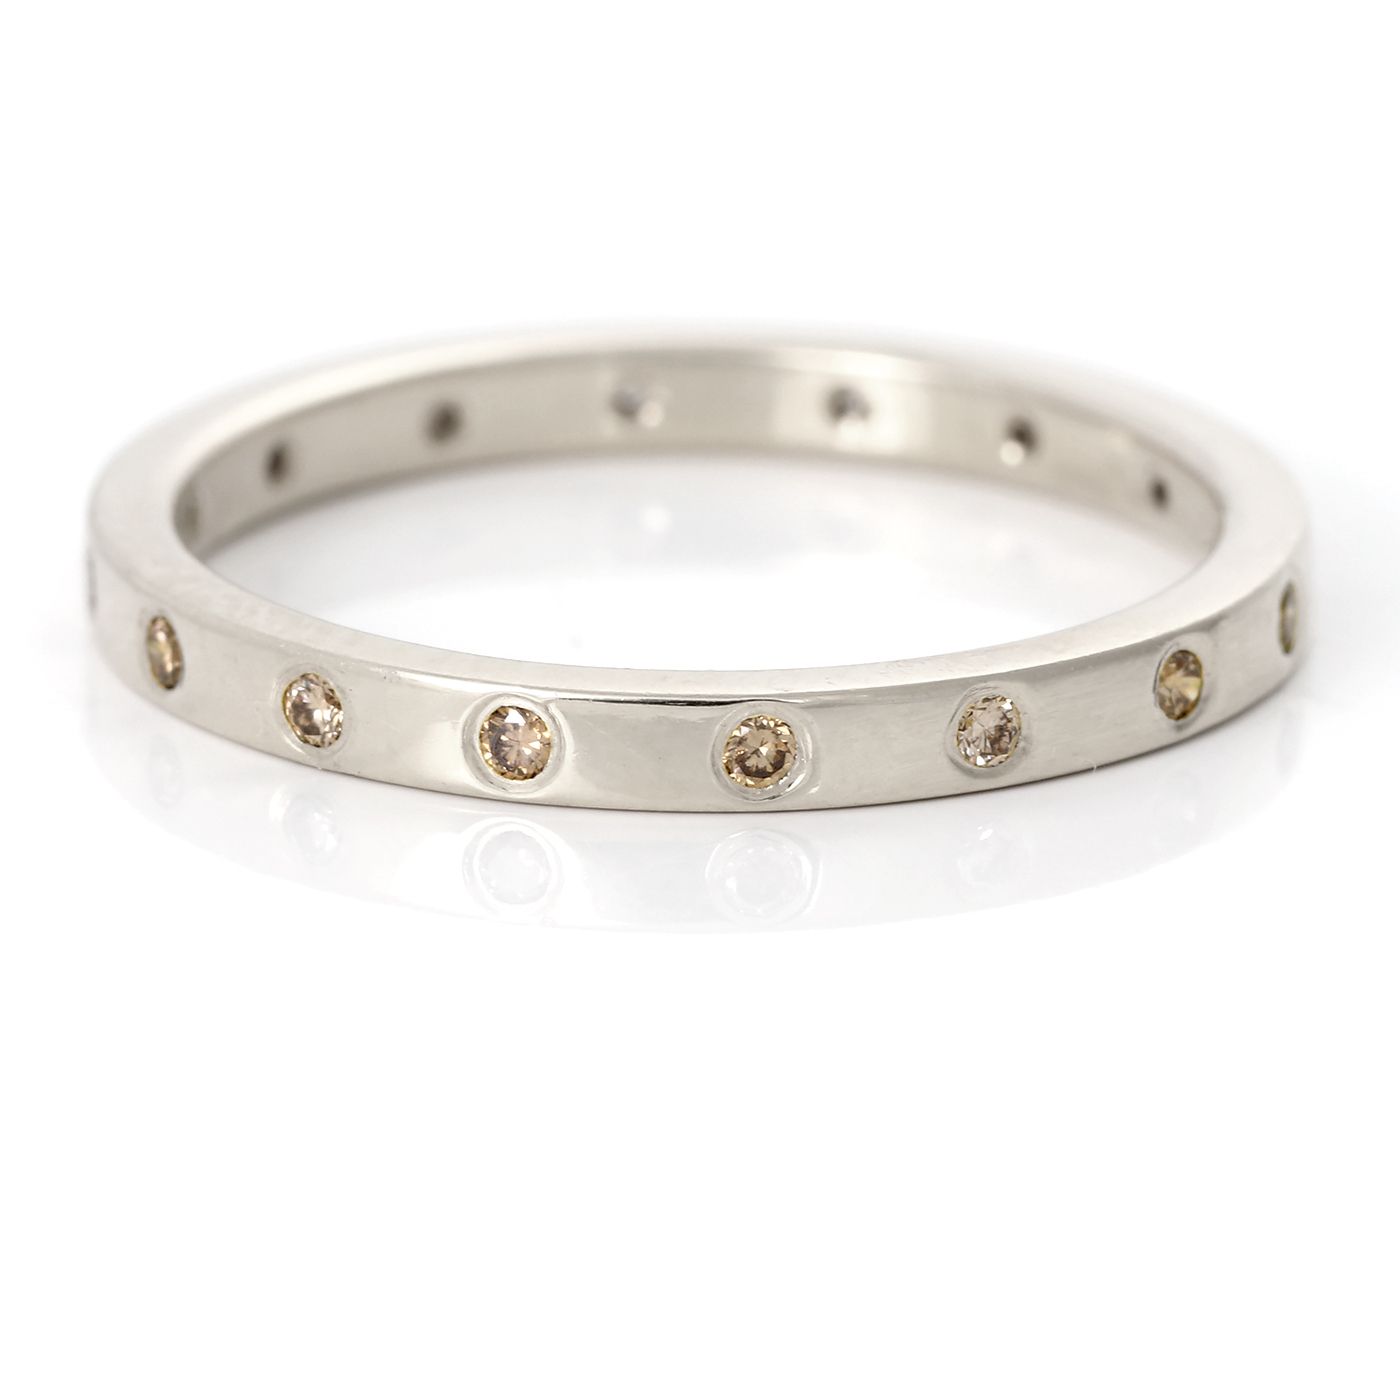 18ct White Gold Champagne Diamond Eternity Ring – Lilia Nash Pertaining To Champagne Diamond Eternity Rings (View 6 of 25)